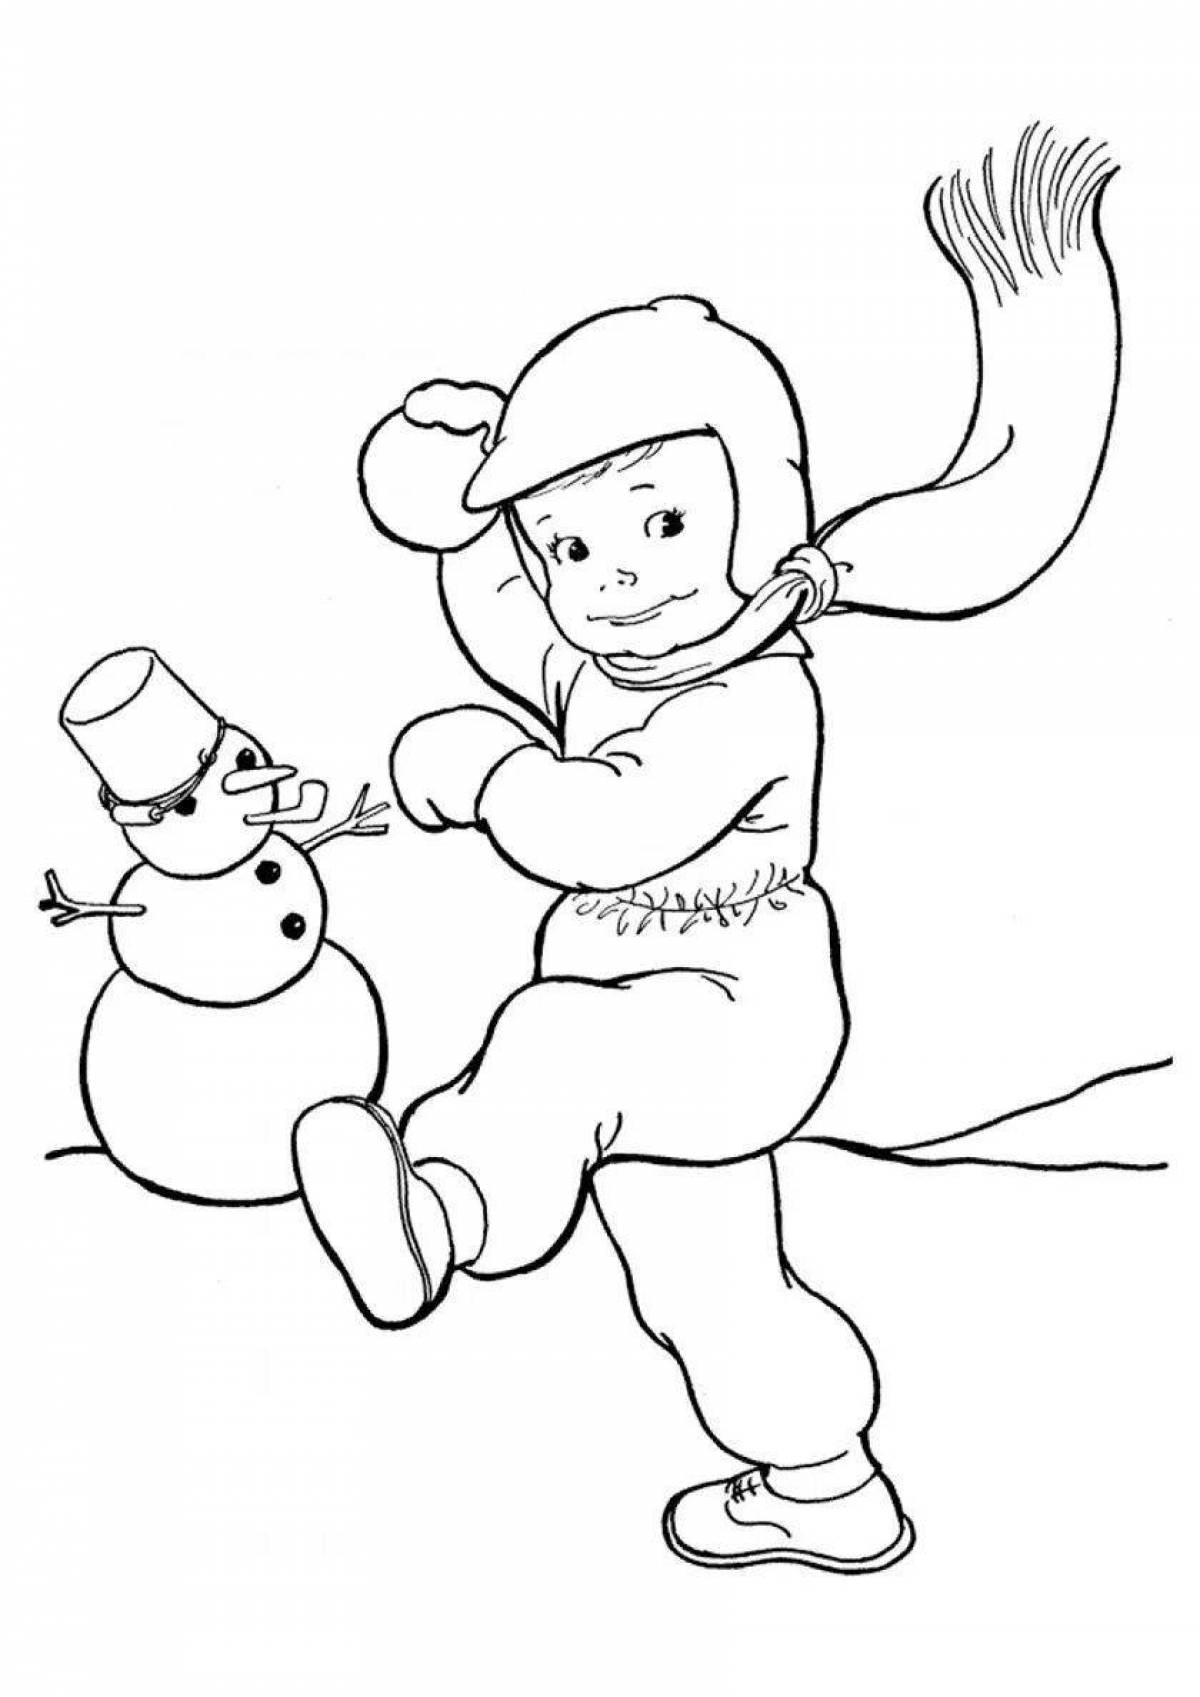 Colouring funny winter games